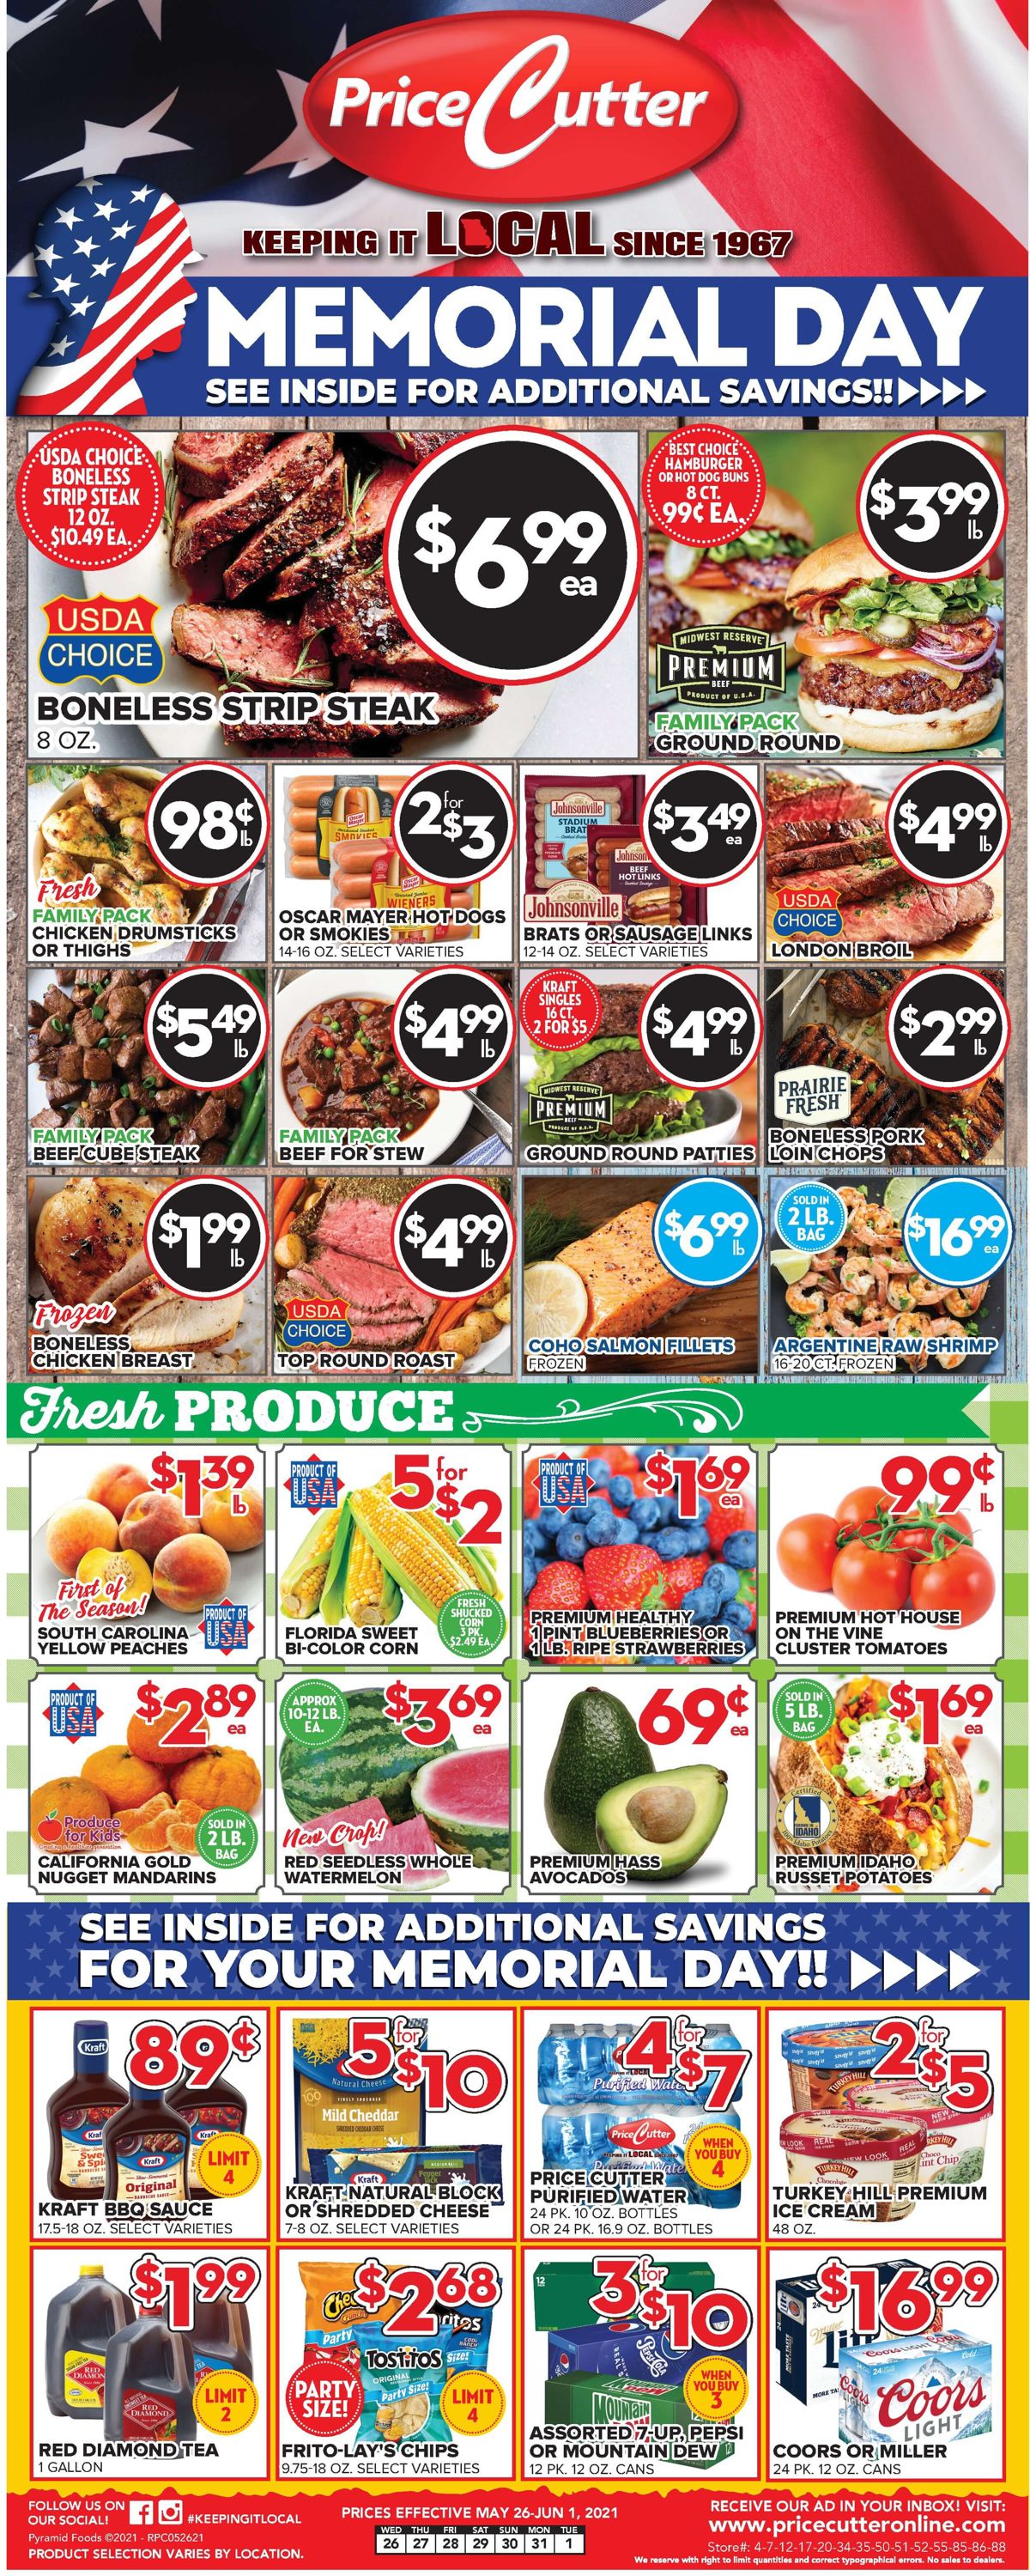 Price Cutter Weekly Ad Circular - valid 05/26-06/01/2021